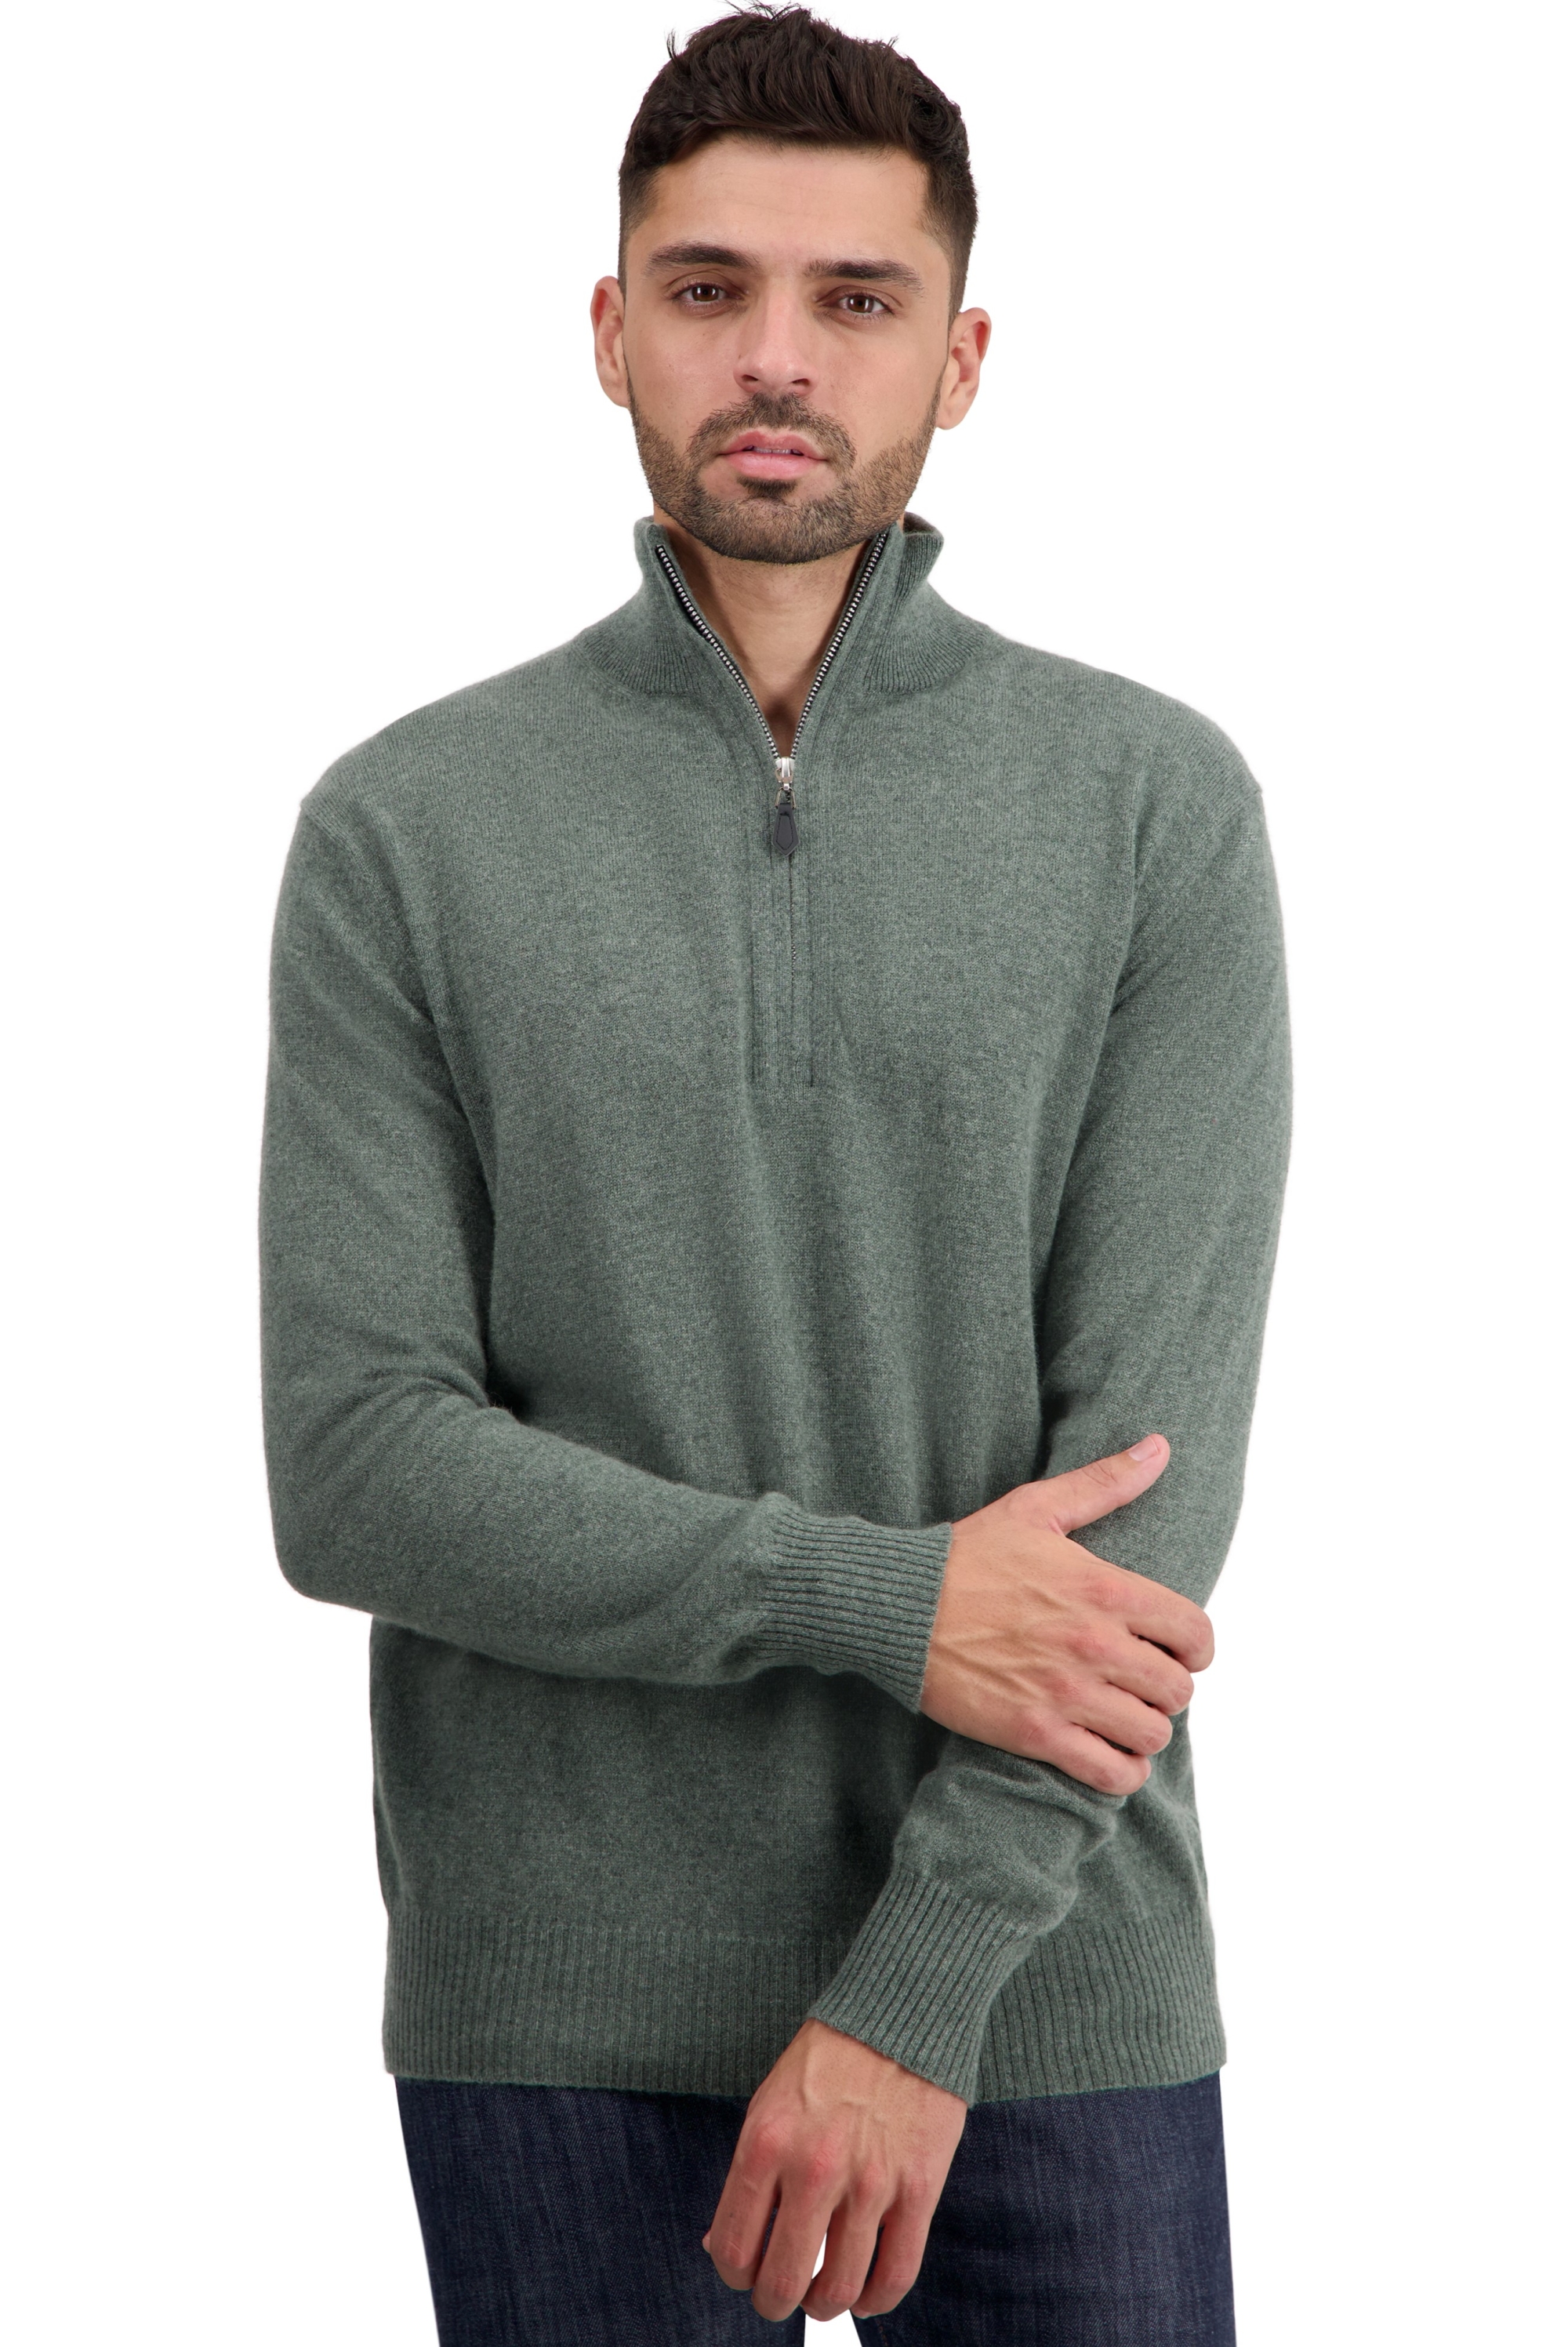 Cachemire petits prix homme toulon first military green xl